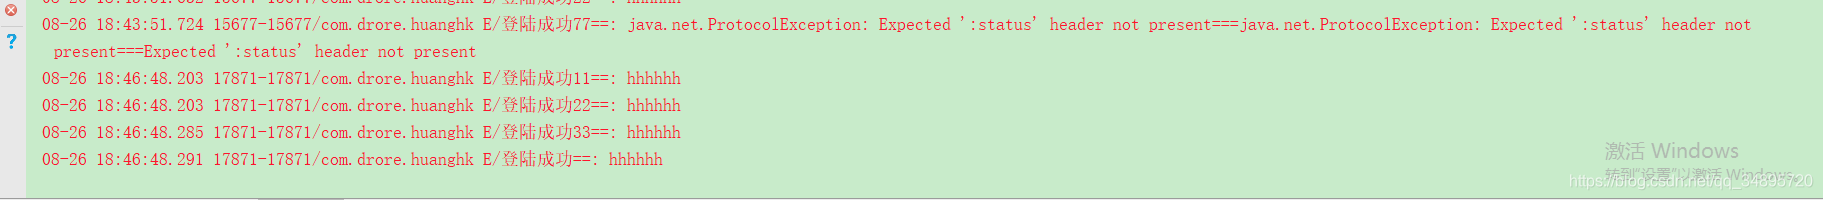 Problemjava.net.ProtocolException: Expected ':status' header not present